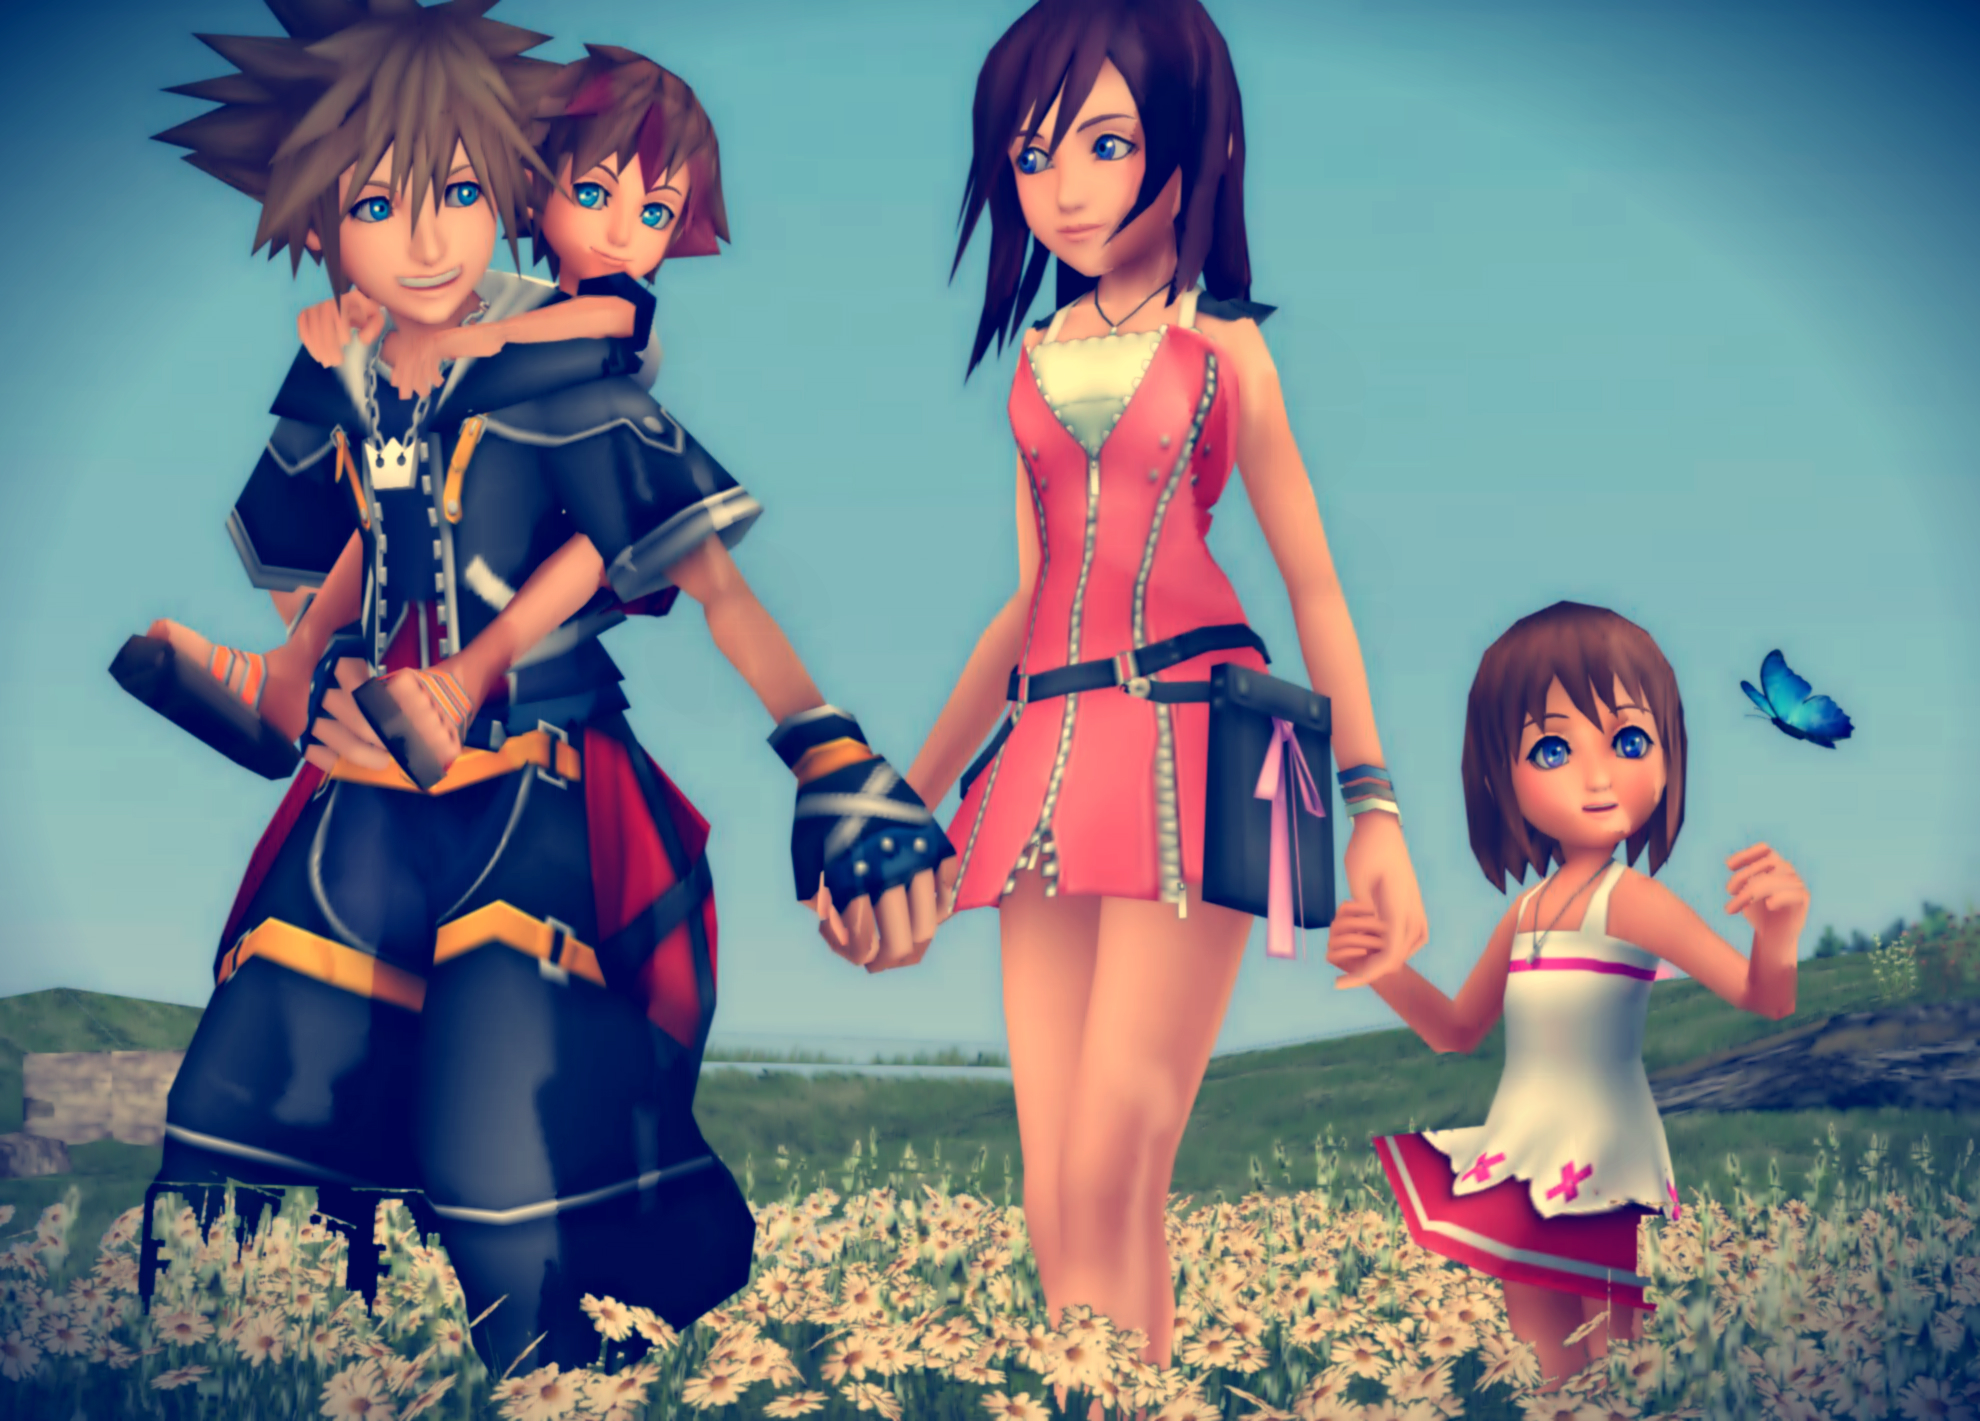 Also, i forgot to mention that person who made these gave Sora and Kairi tw...